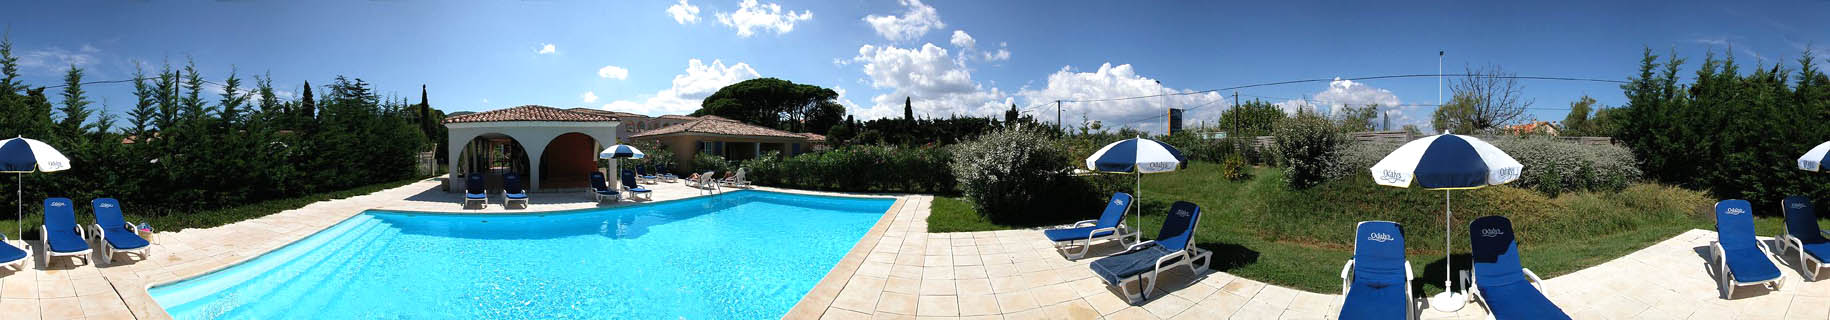 Gassin - Le Jardin d'Artemis : Swimming pool of the residence